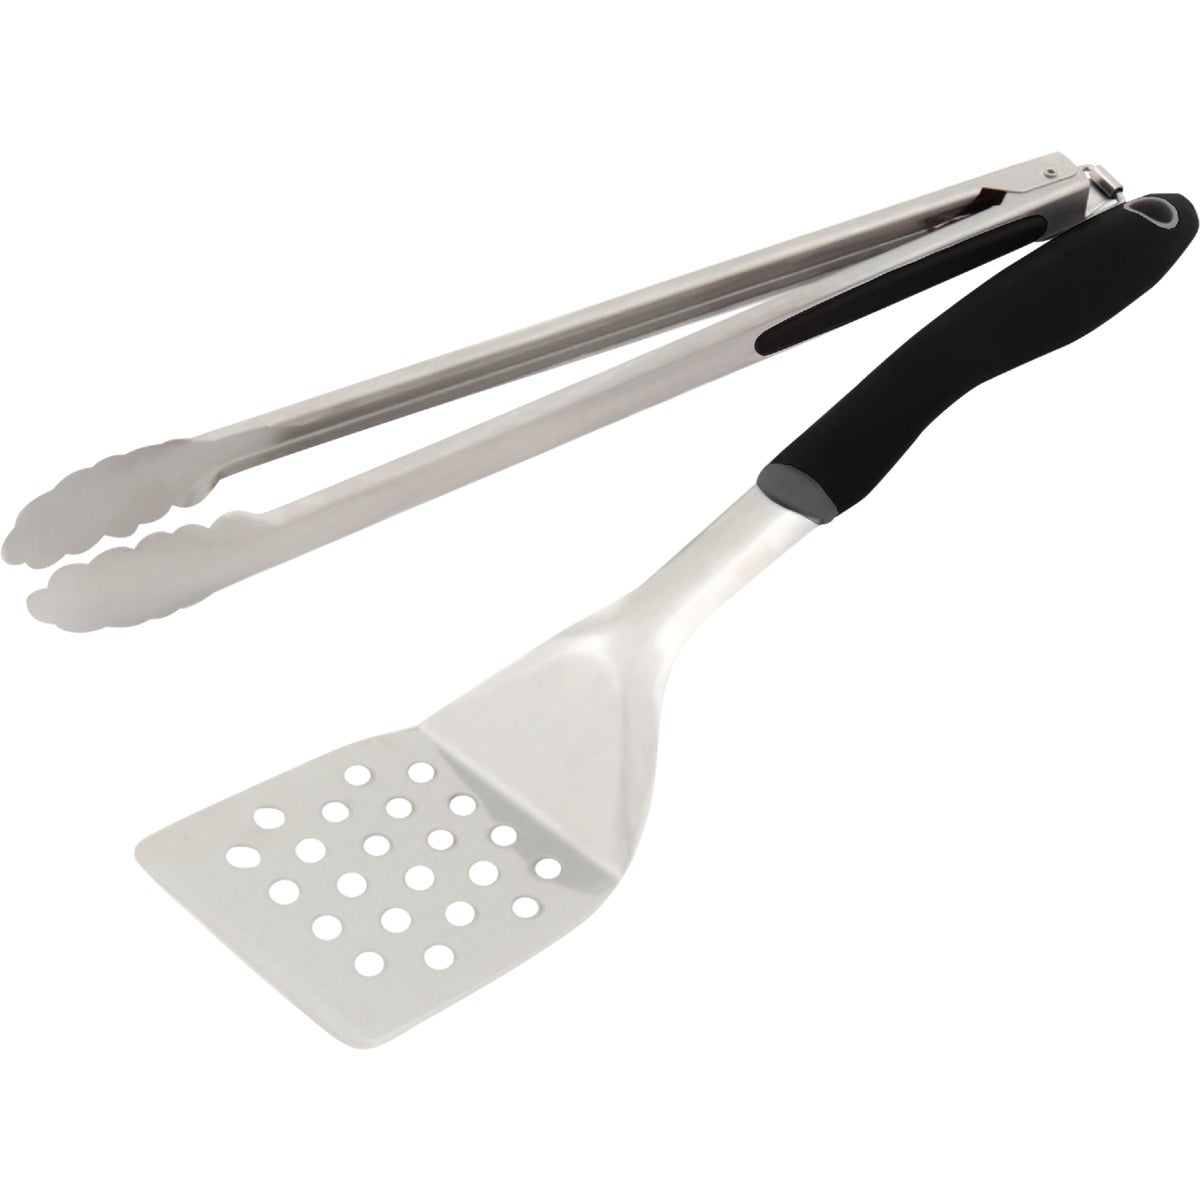 Item 801614, 2-piece set contains an ergonomic stainless steel turner with black handle 